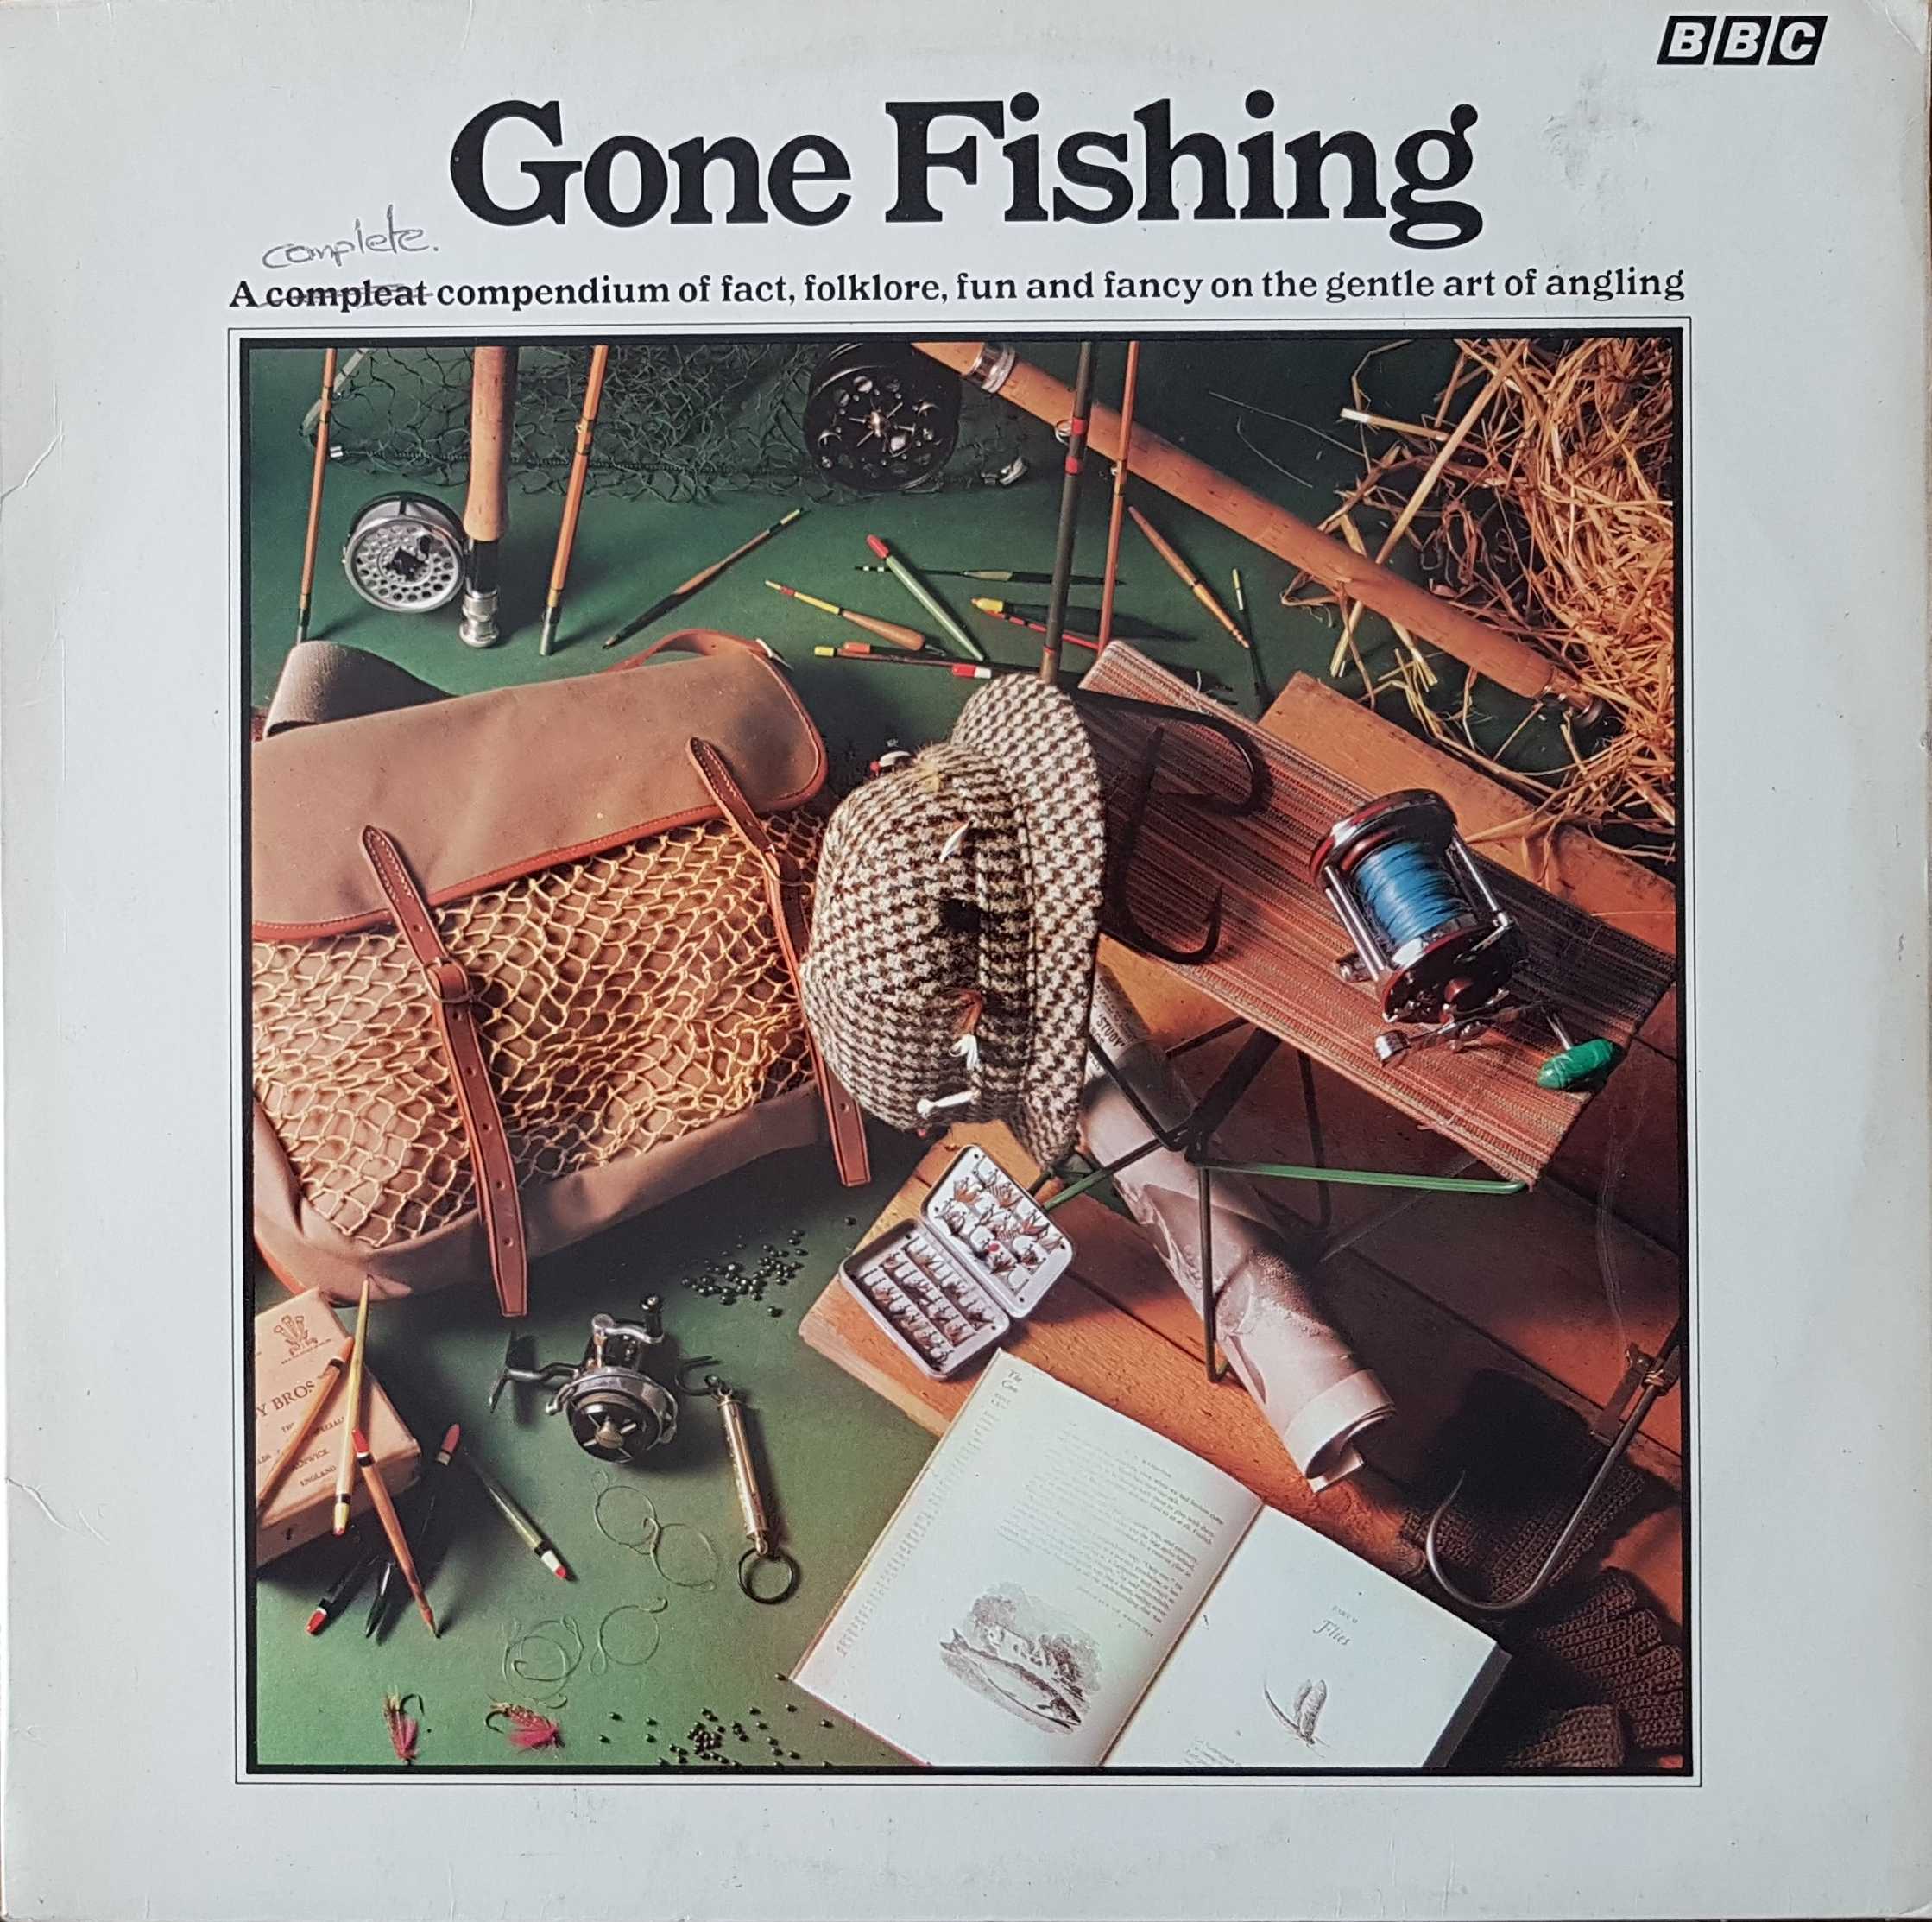 Picture of REC 71 Gone fishing by artist Various from the BBC albums - Records and Tapes library